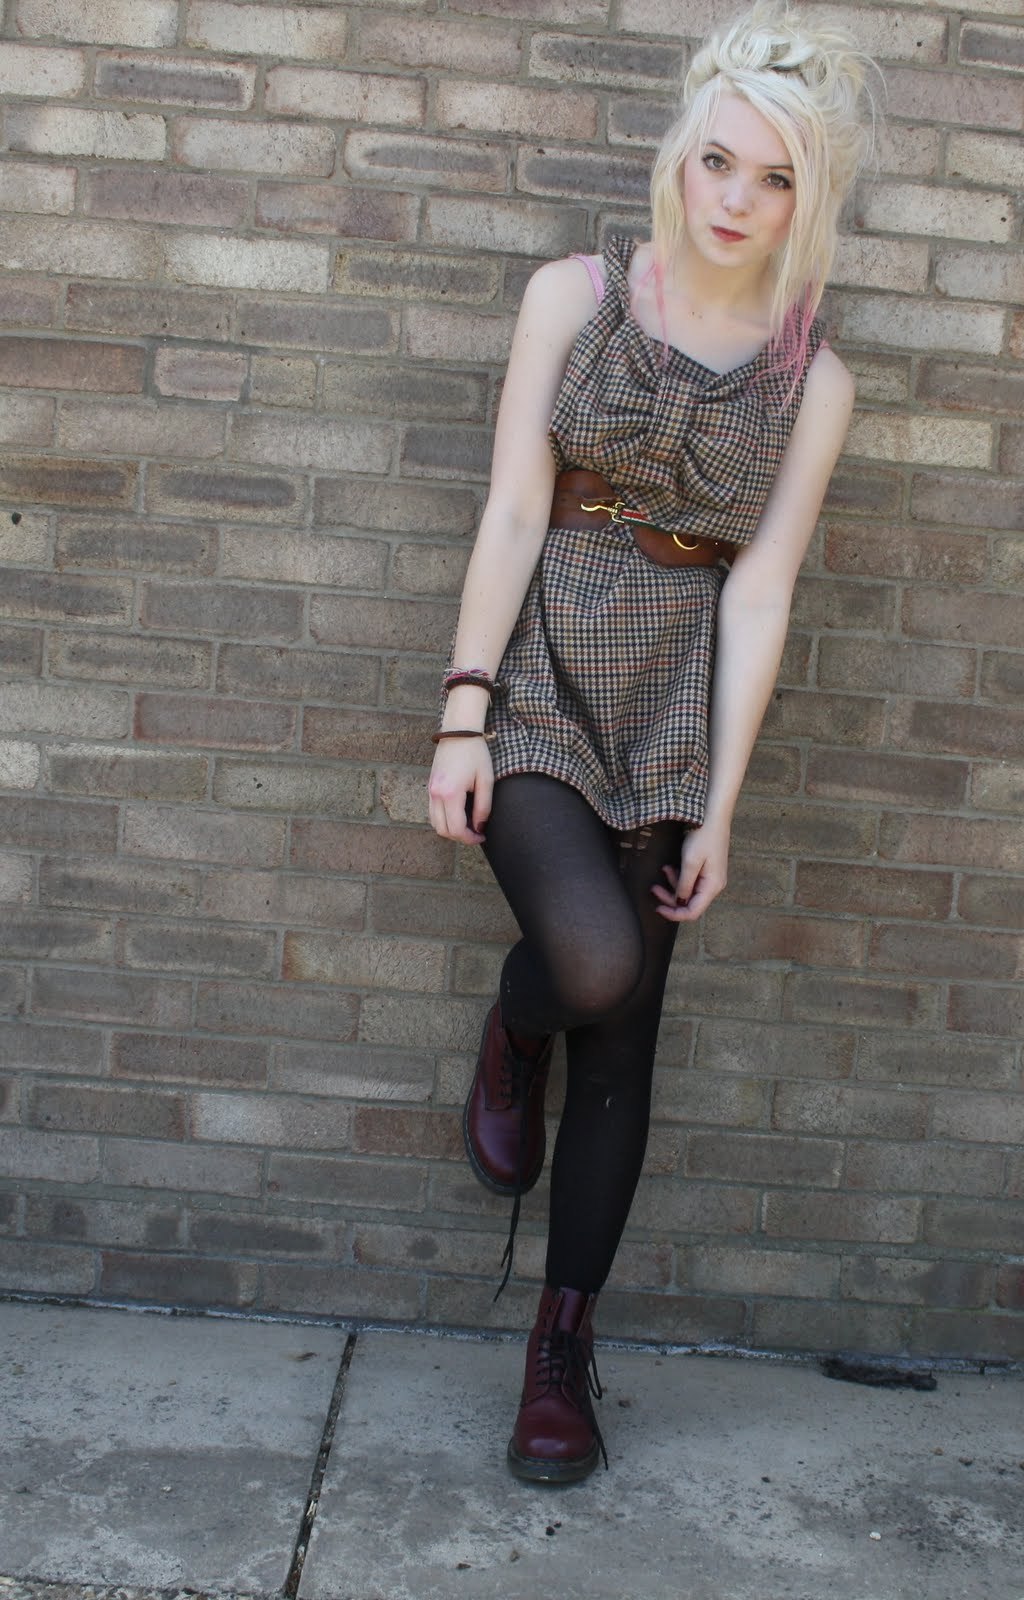 Cute blondie in pantyhose and docs :) - Tumblr Pics